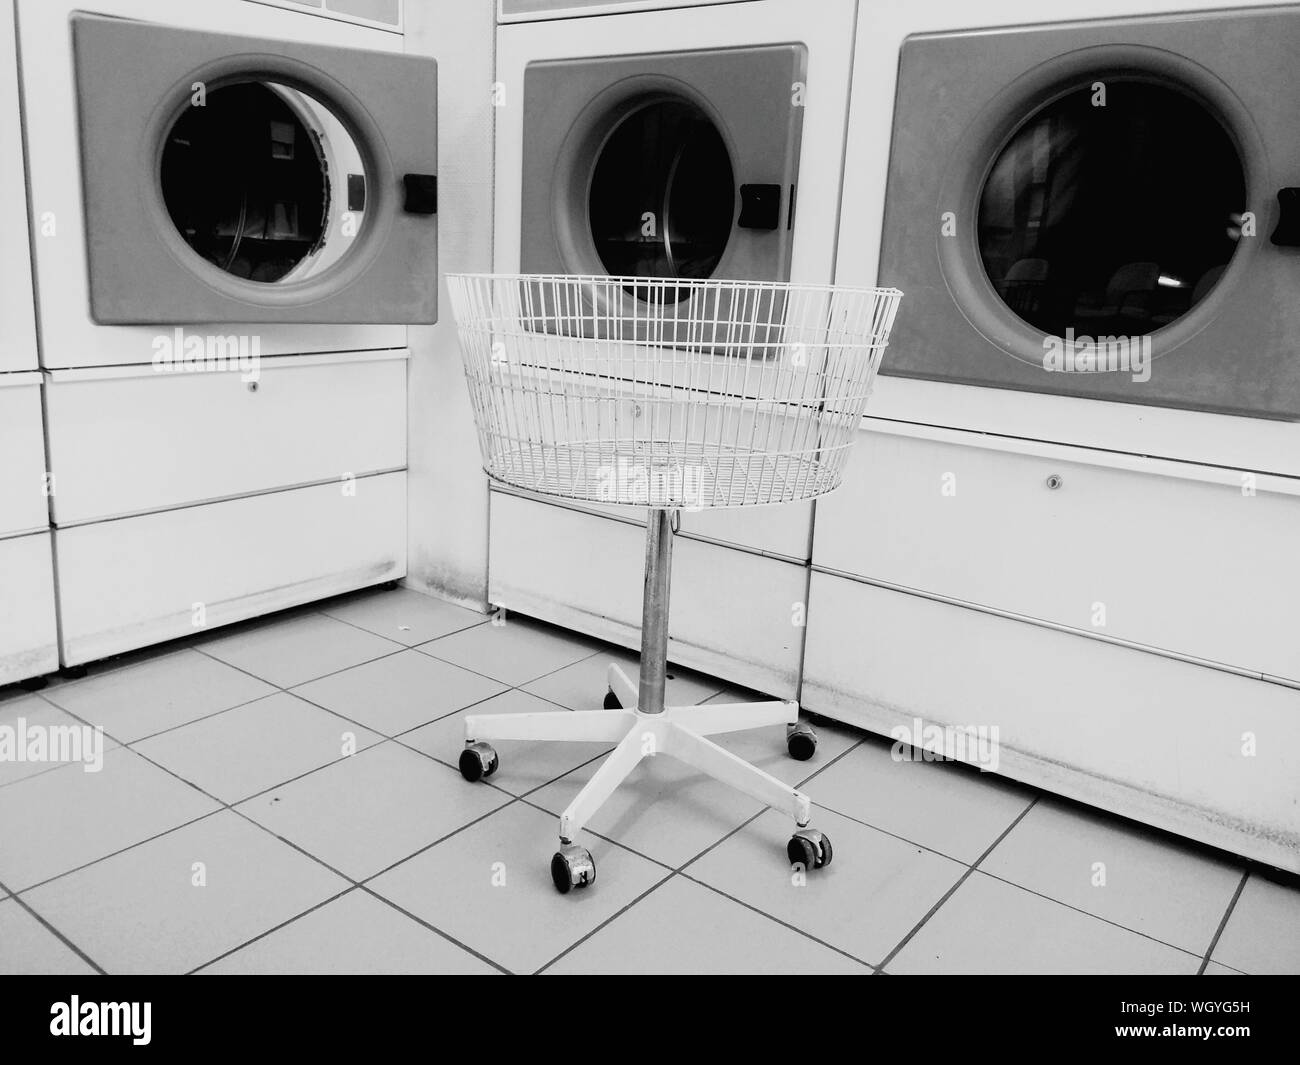 Laundry Basket High Resolution Stock Photography and Images - Alamy